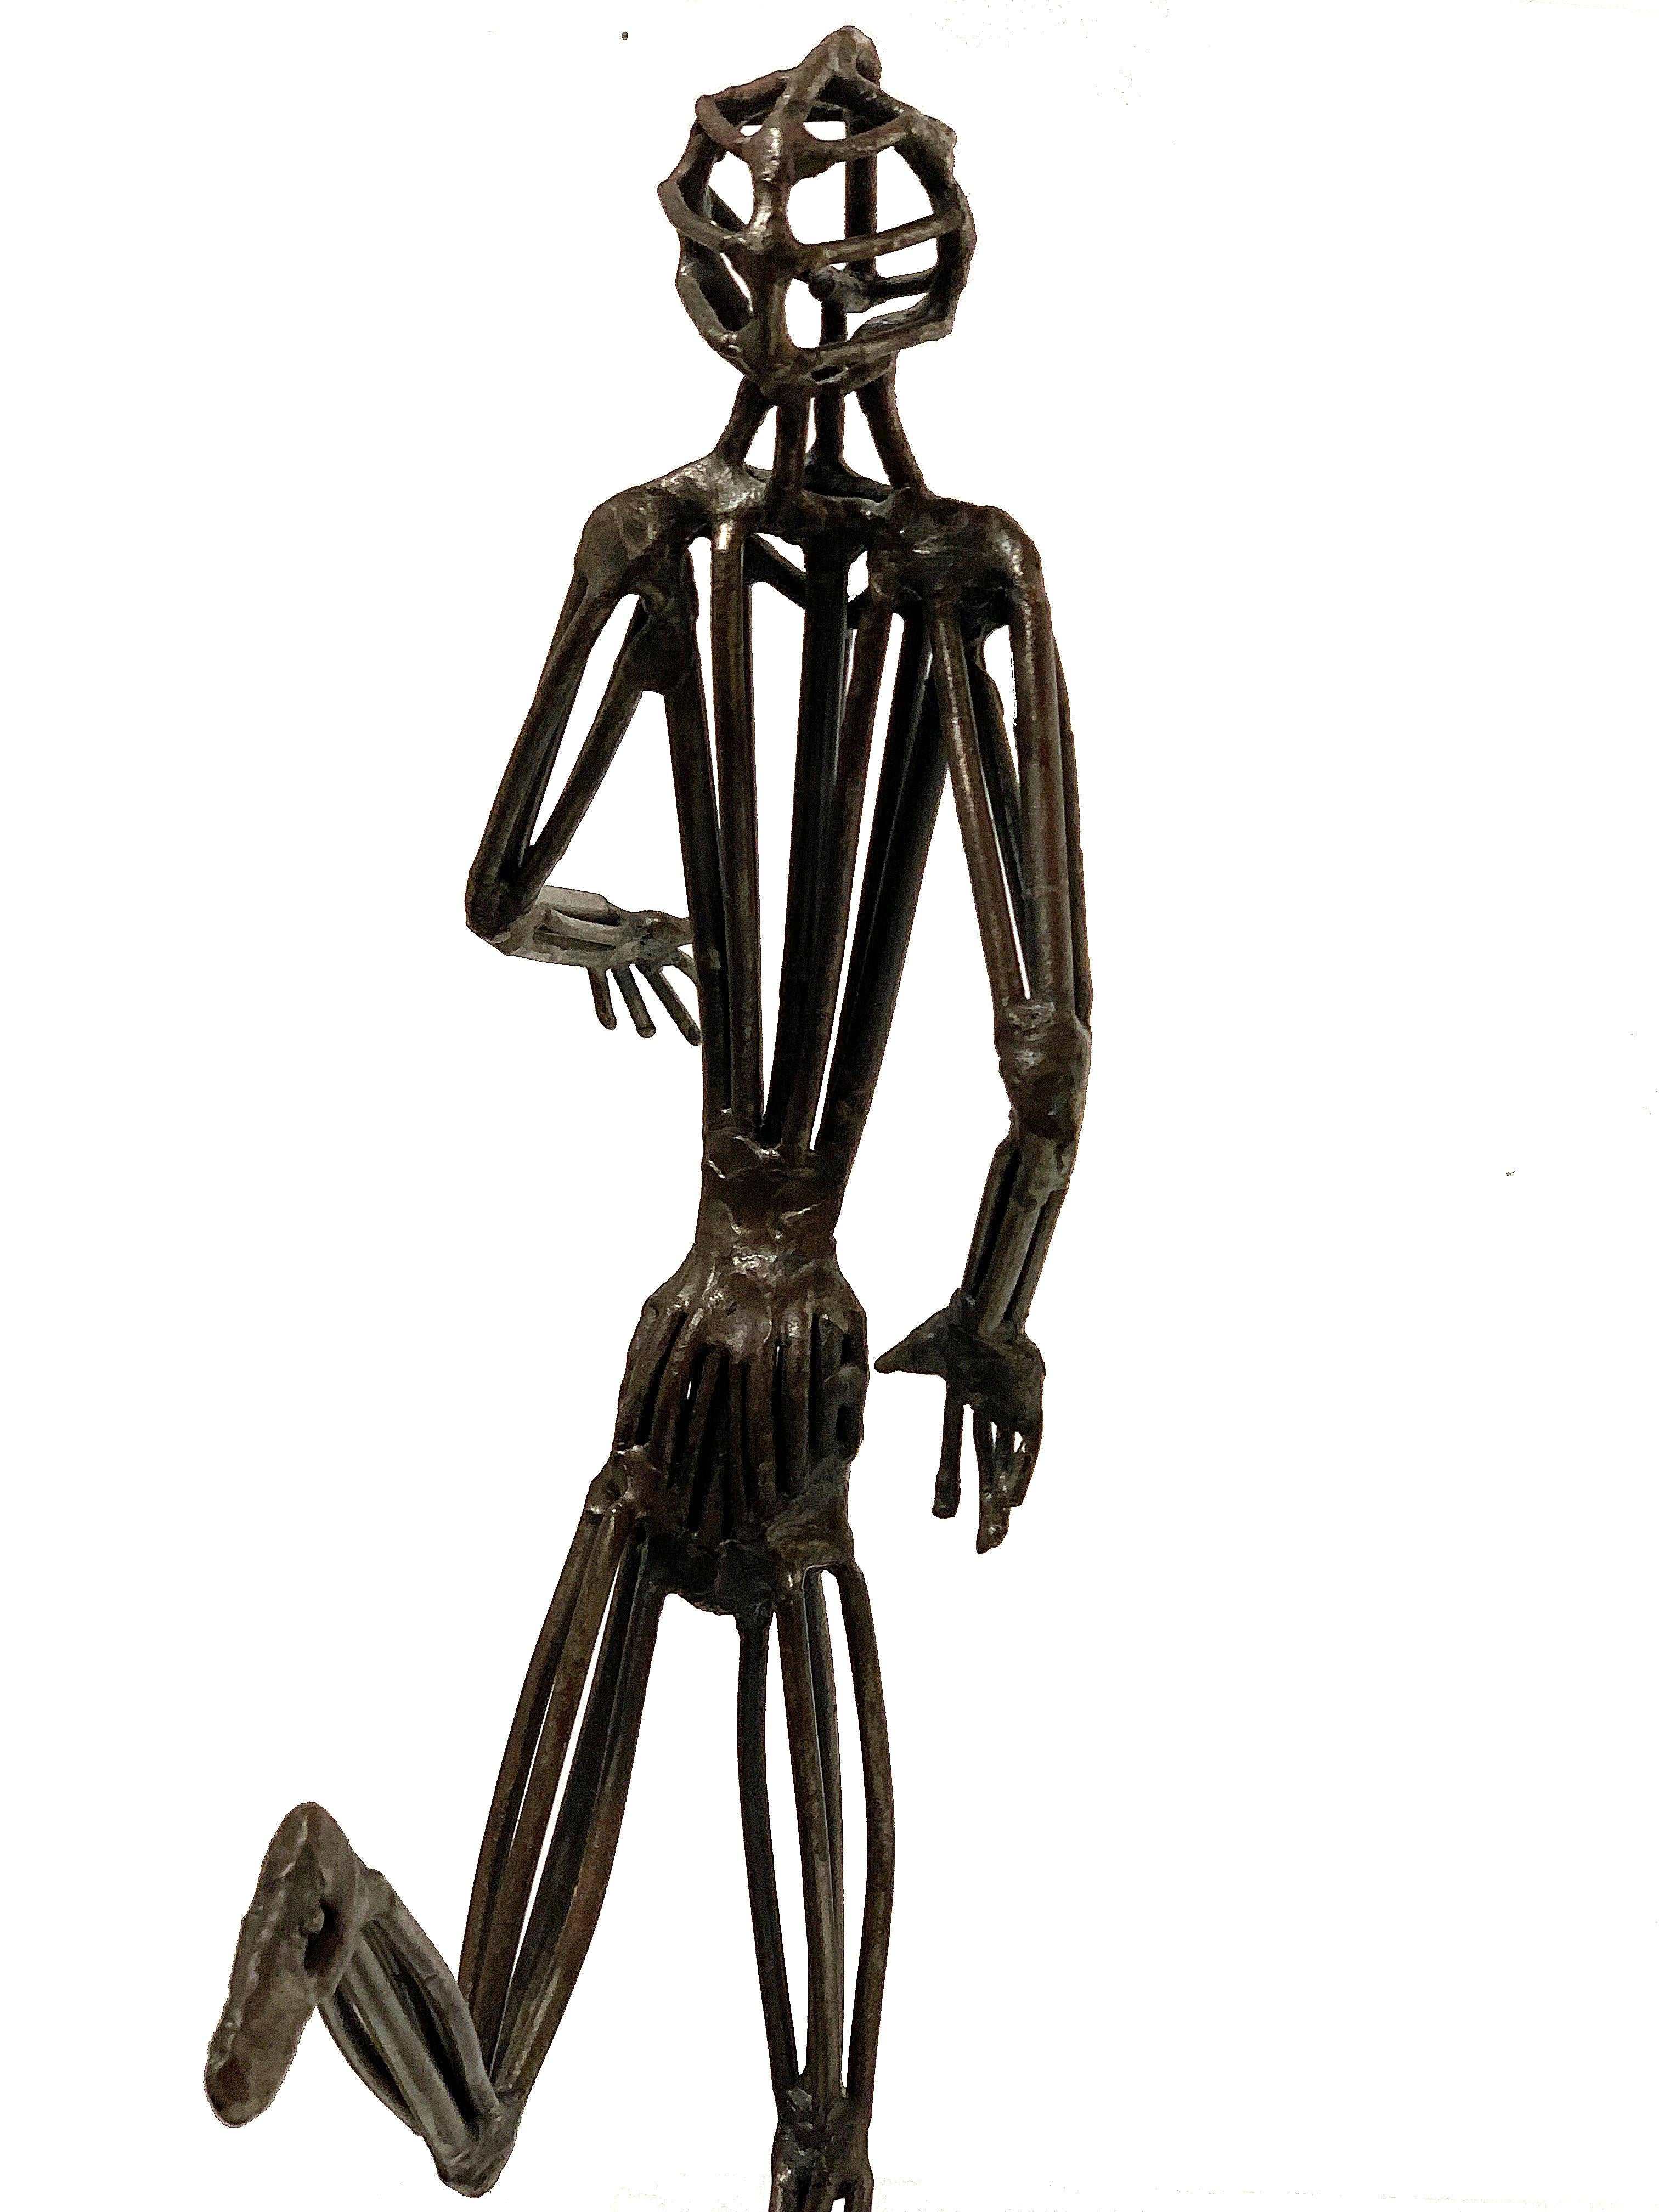 Metal runner sculpture by Pittsburgh artist William J. Wessel. The figure is well balanced and has a pleasant stride, as though enjoying a long run.